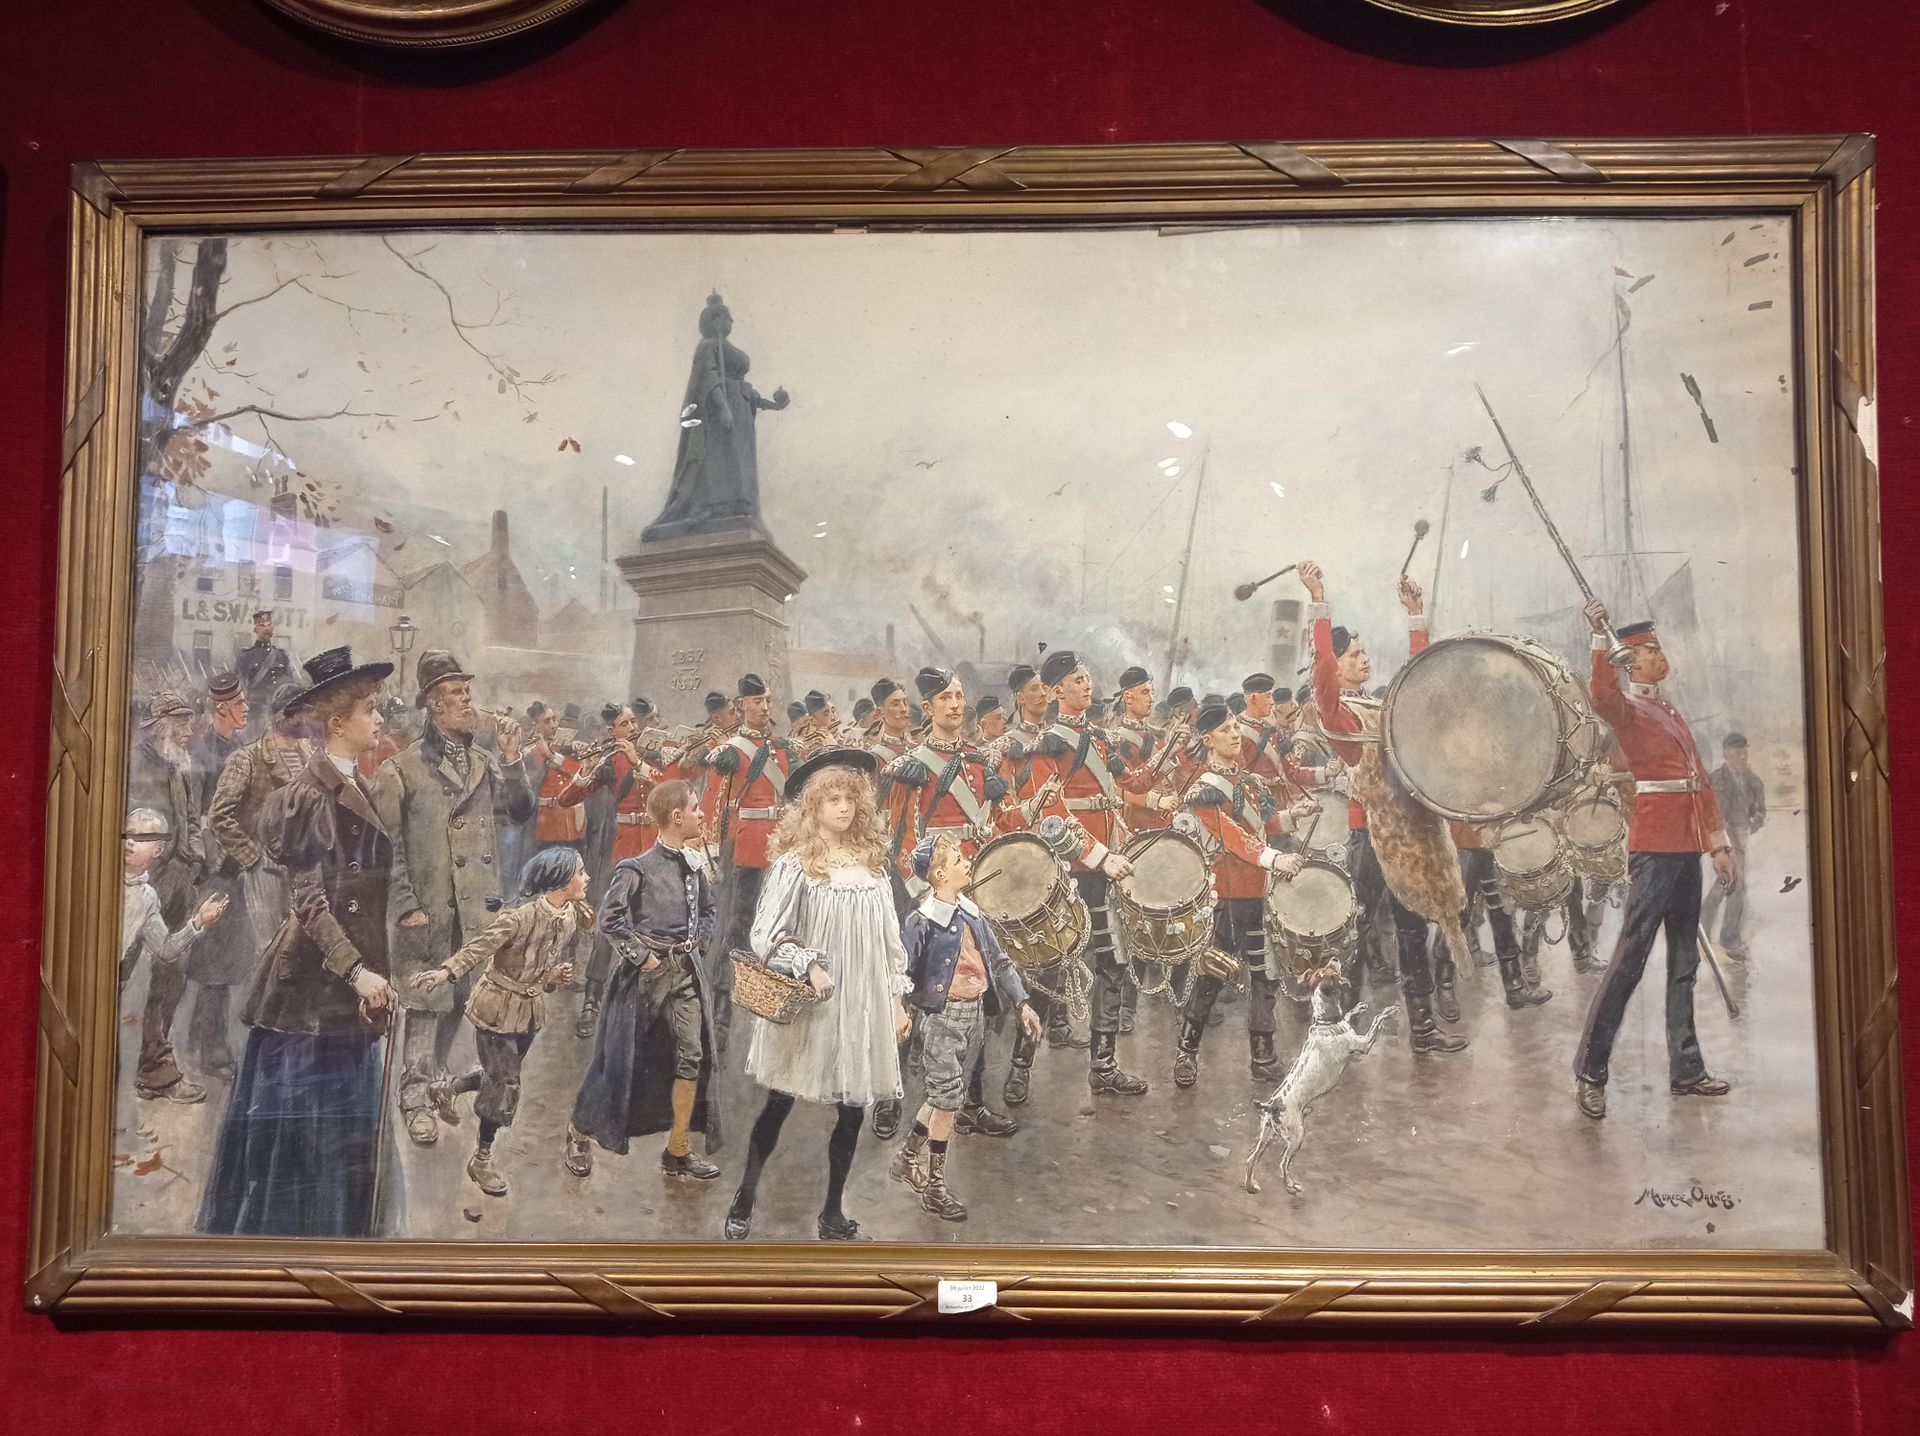 Maurice ORANGE (1867-1916) The Military Parade
Watercolor and gouache on paper
S&hellip;